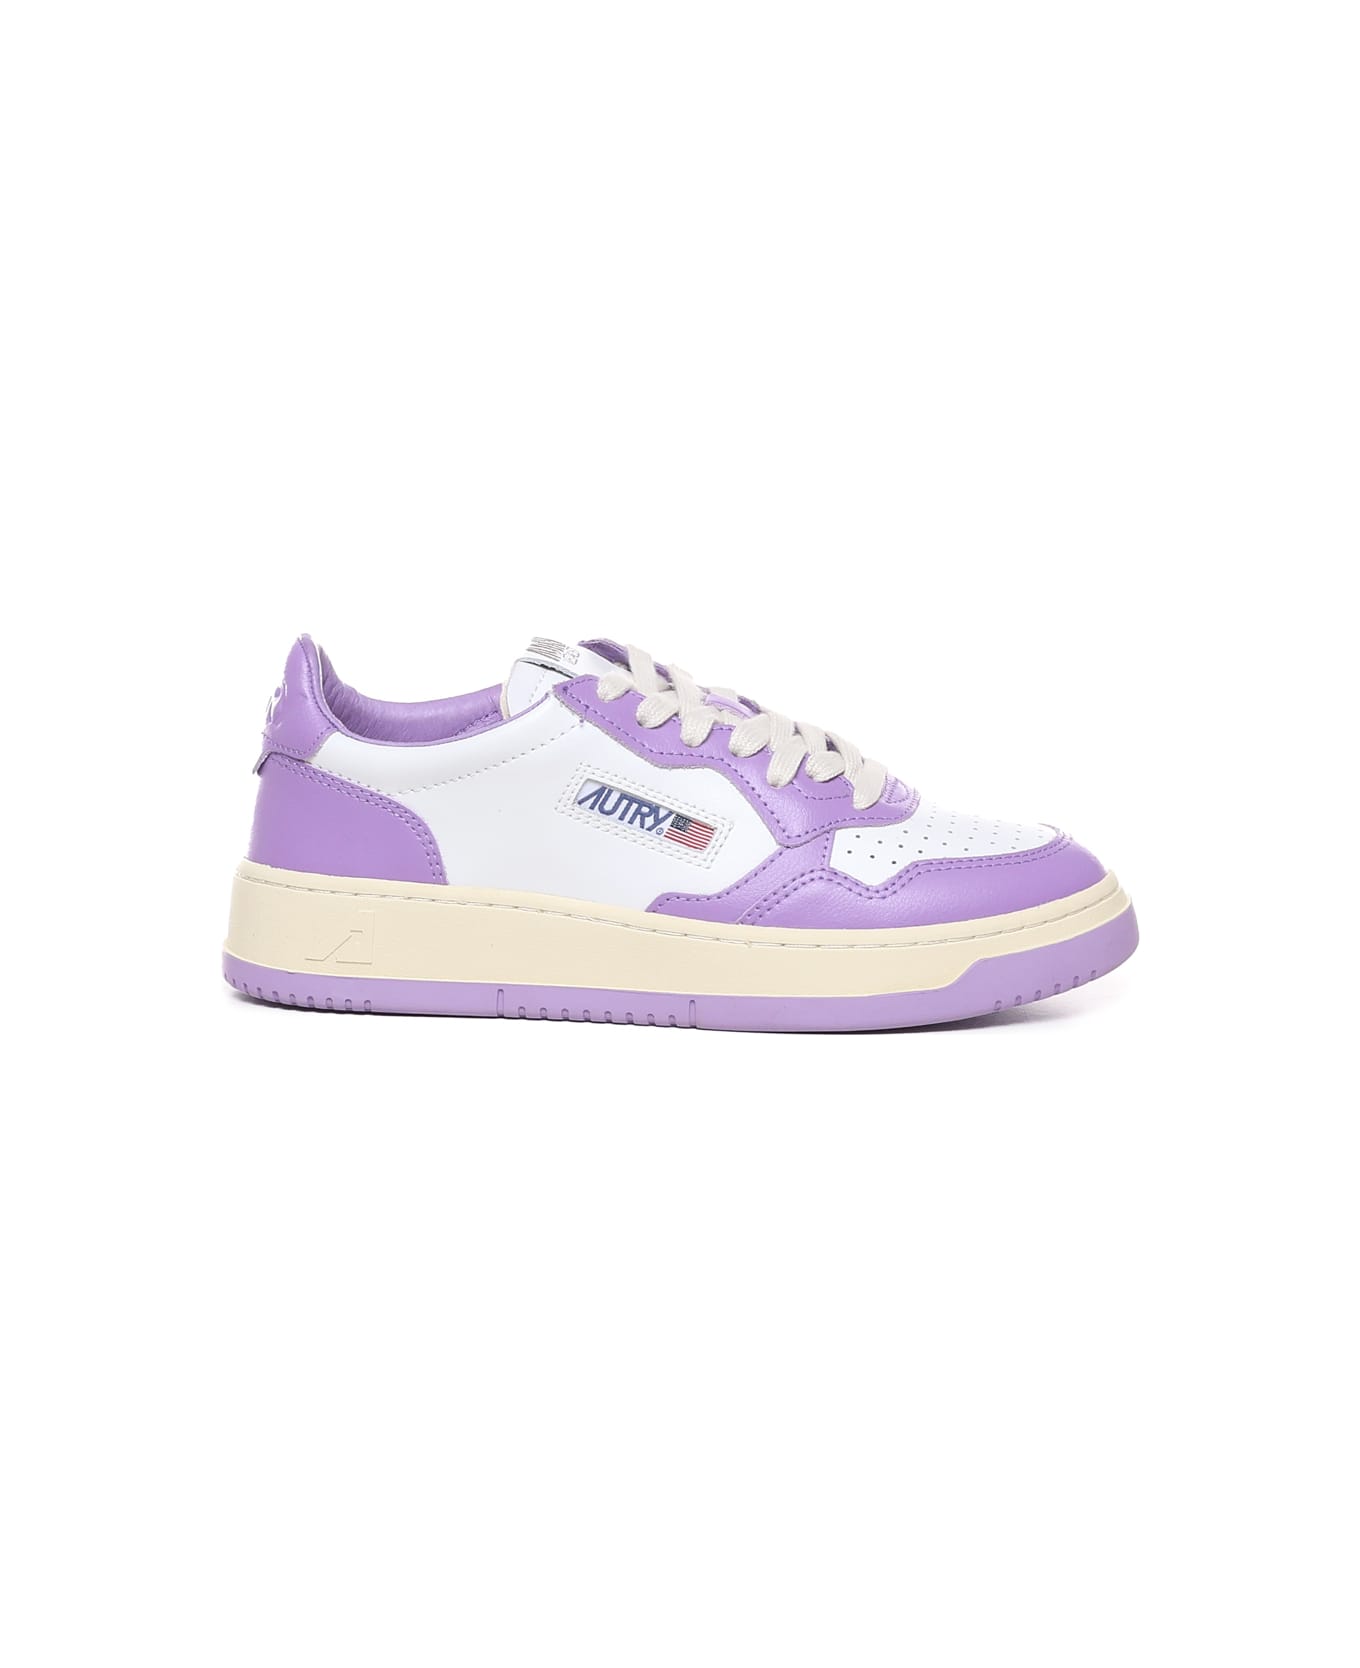 Autry Sneakers Medalist Basse In Pelle Bicolore - Wht Eng Lav